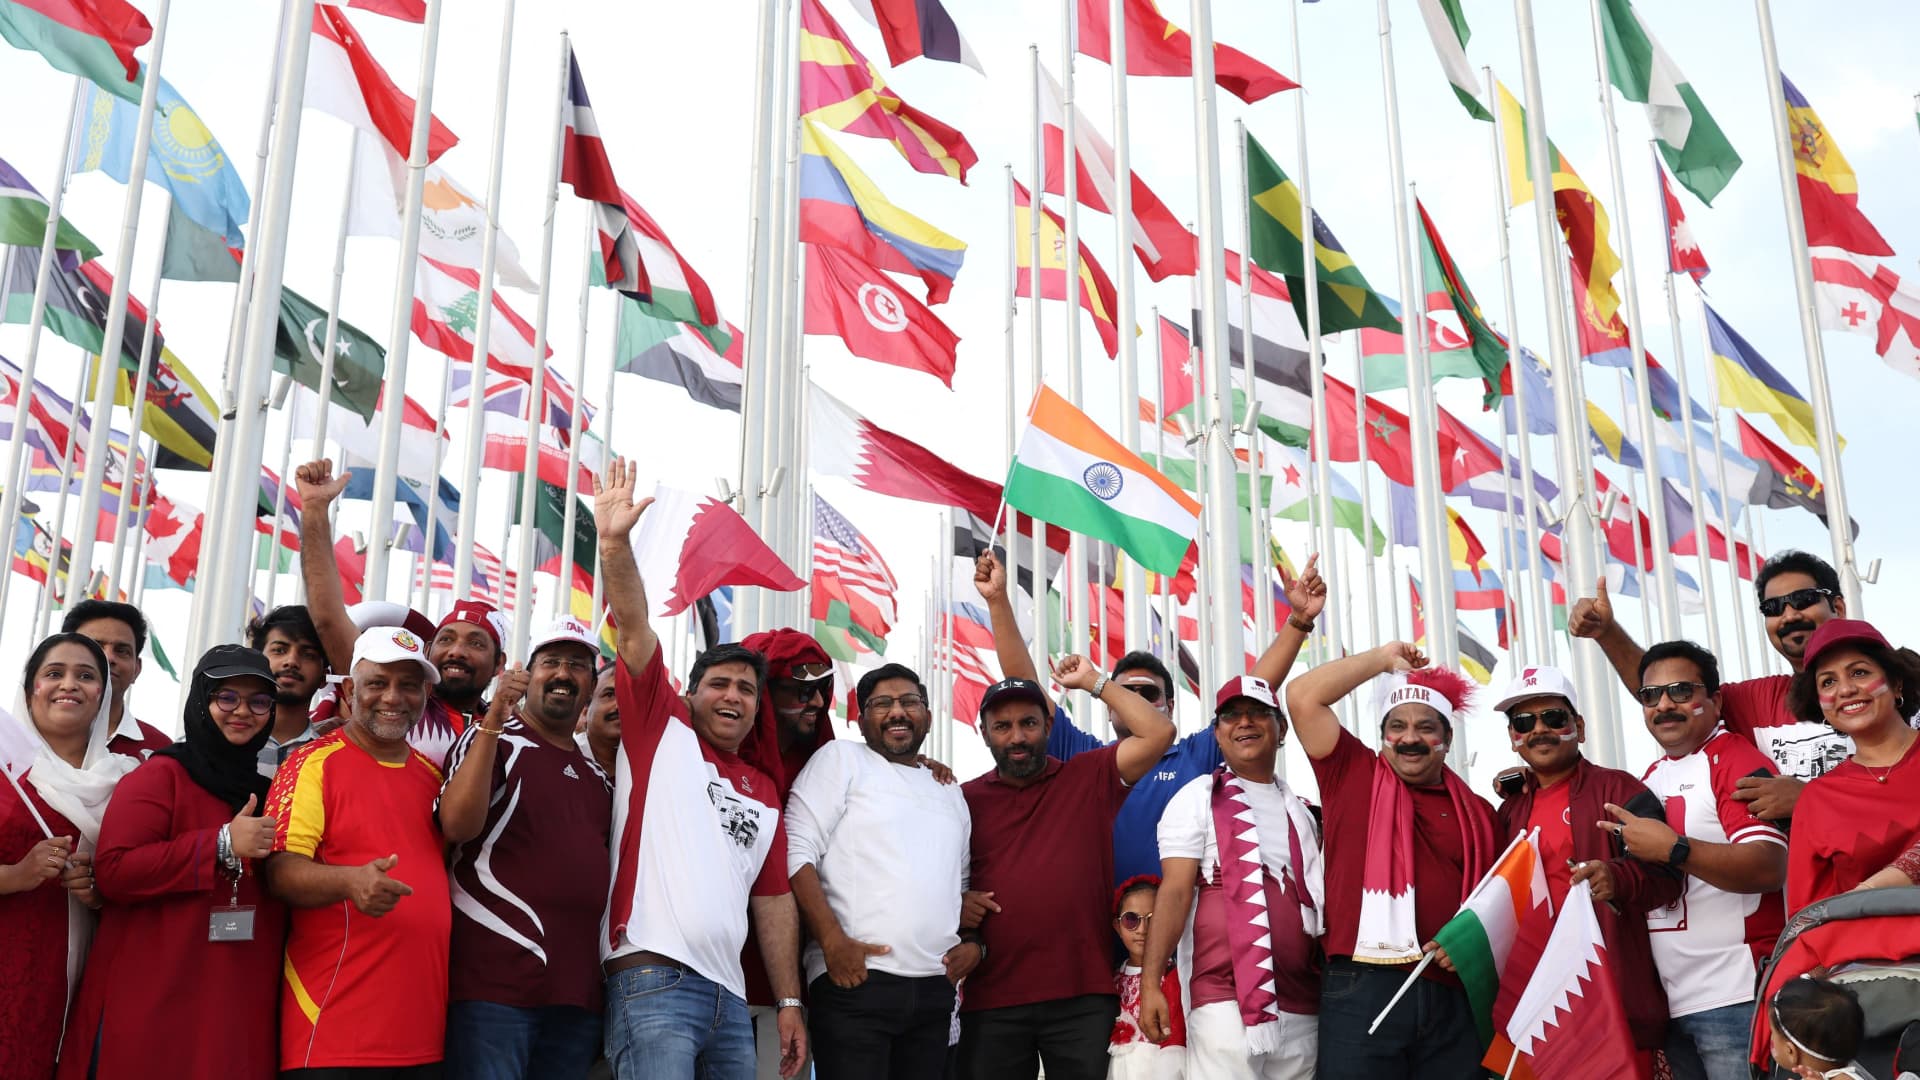 Qatar fans are pictured ahead of the FIFA World Cup in Qatar, November 18, 2022.